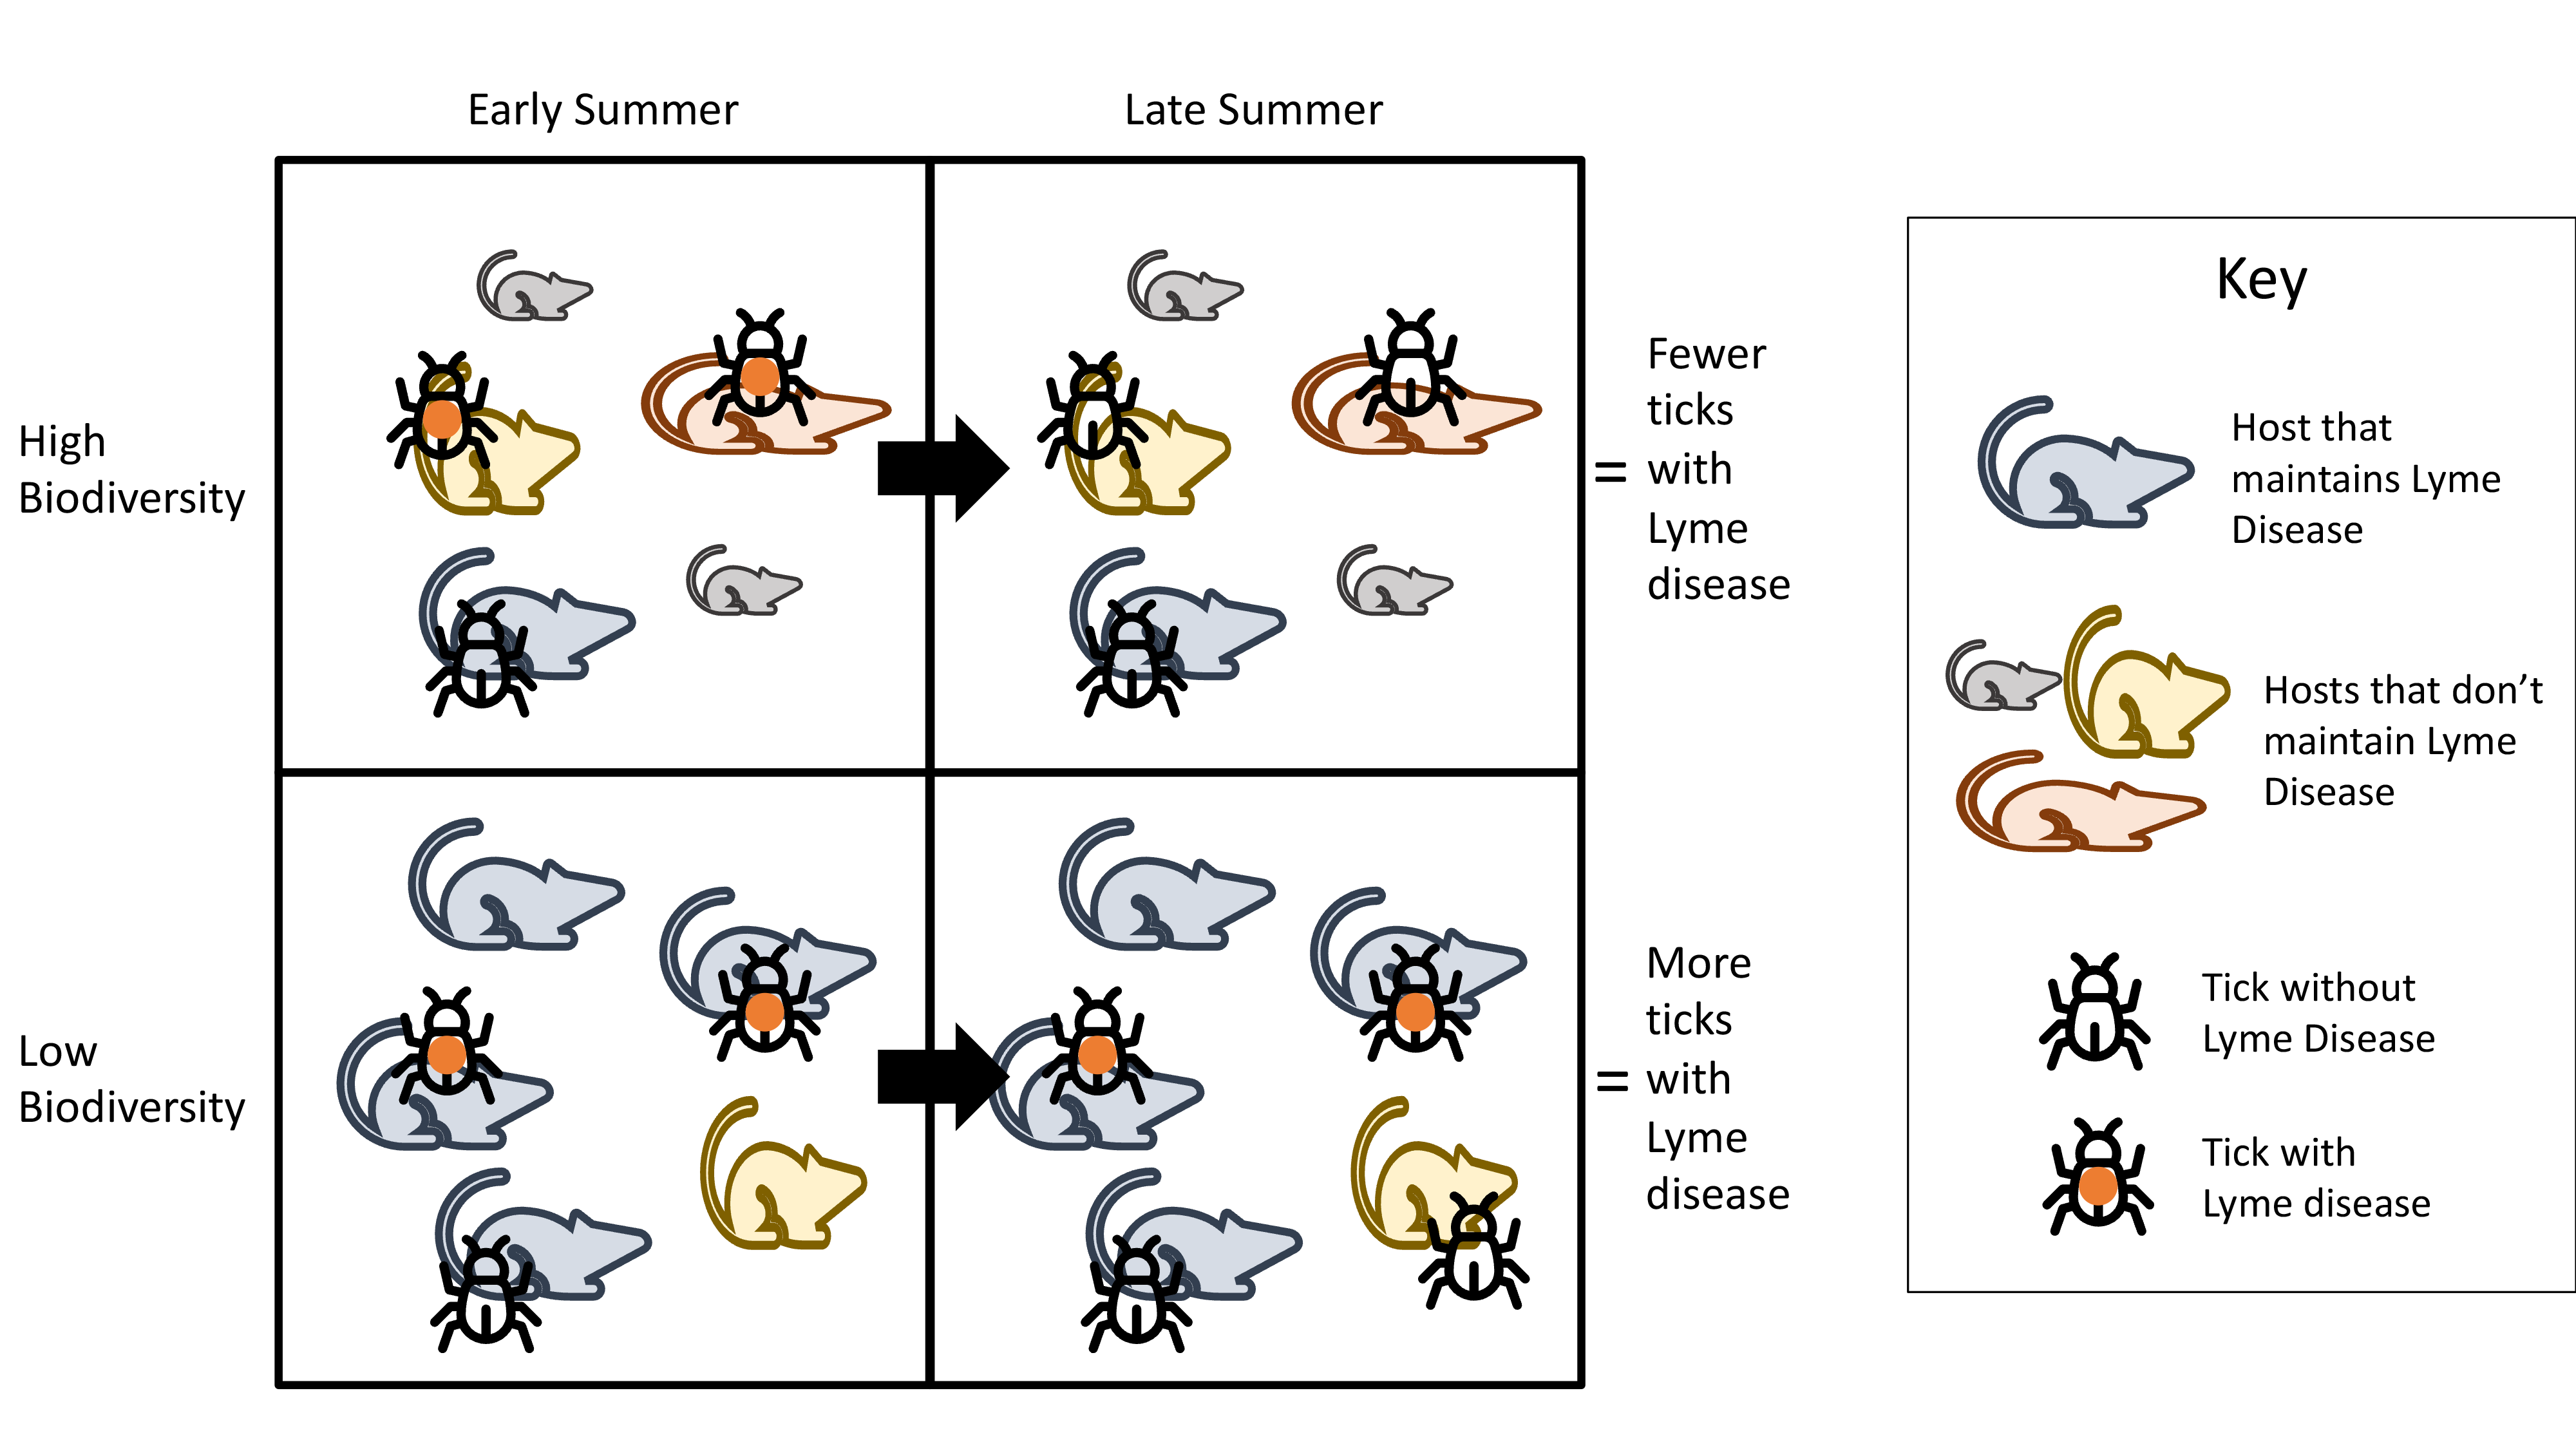 graphic showing prevalence of Lyme disease in nosts and ticks at different seasons and biodiversity levels